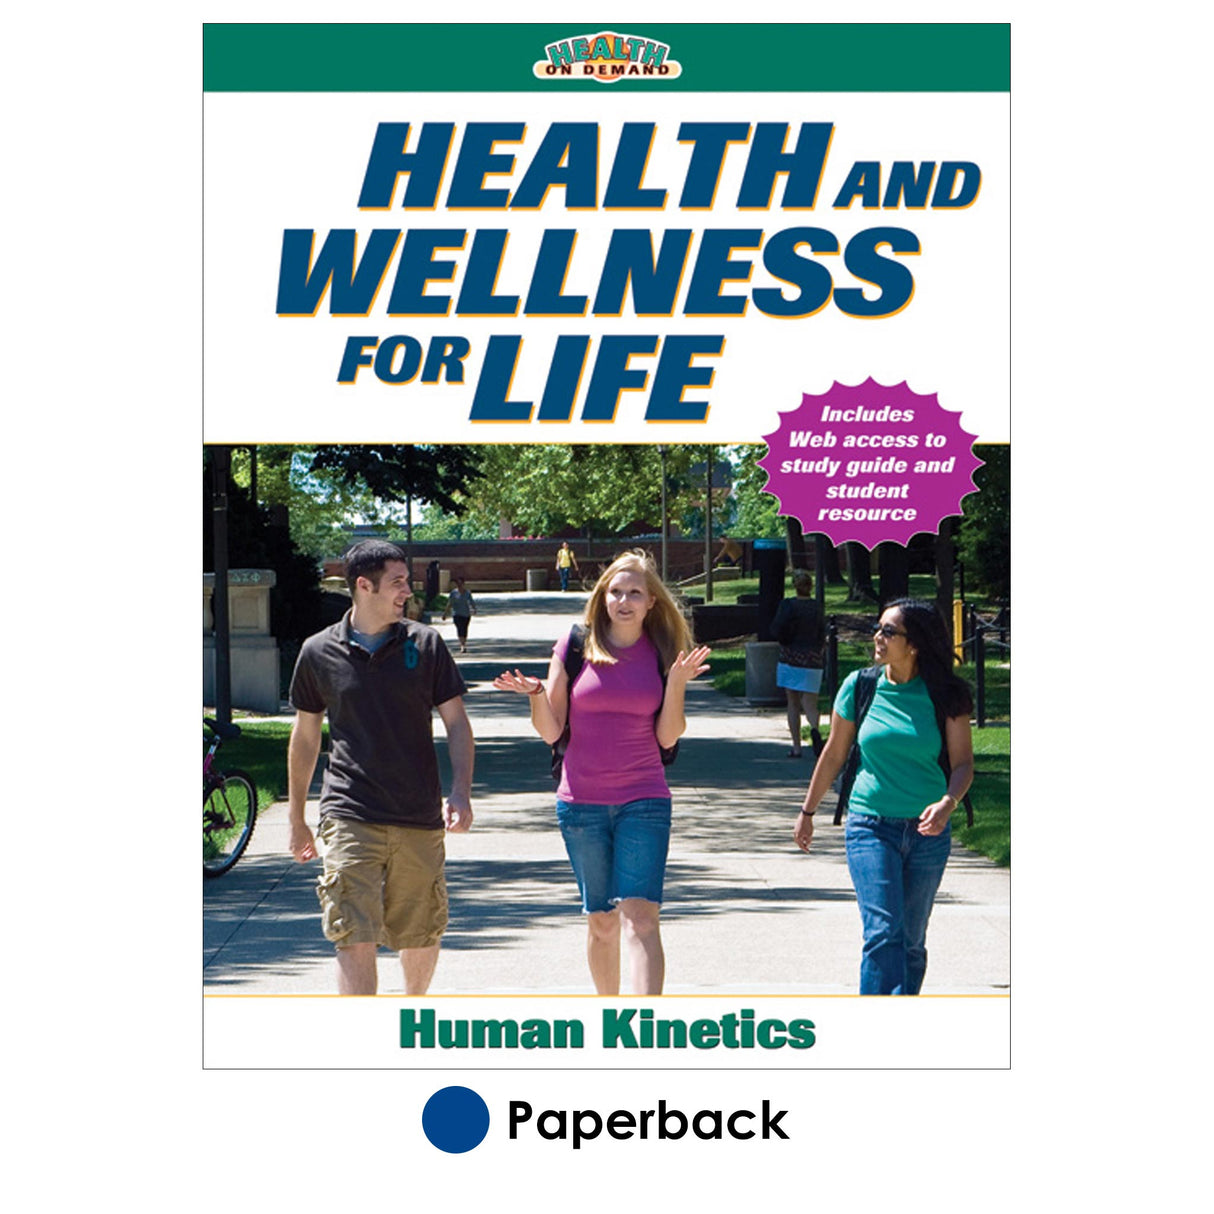 Health and Wellness for Life With Online Study Guide